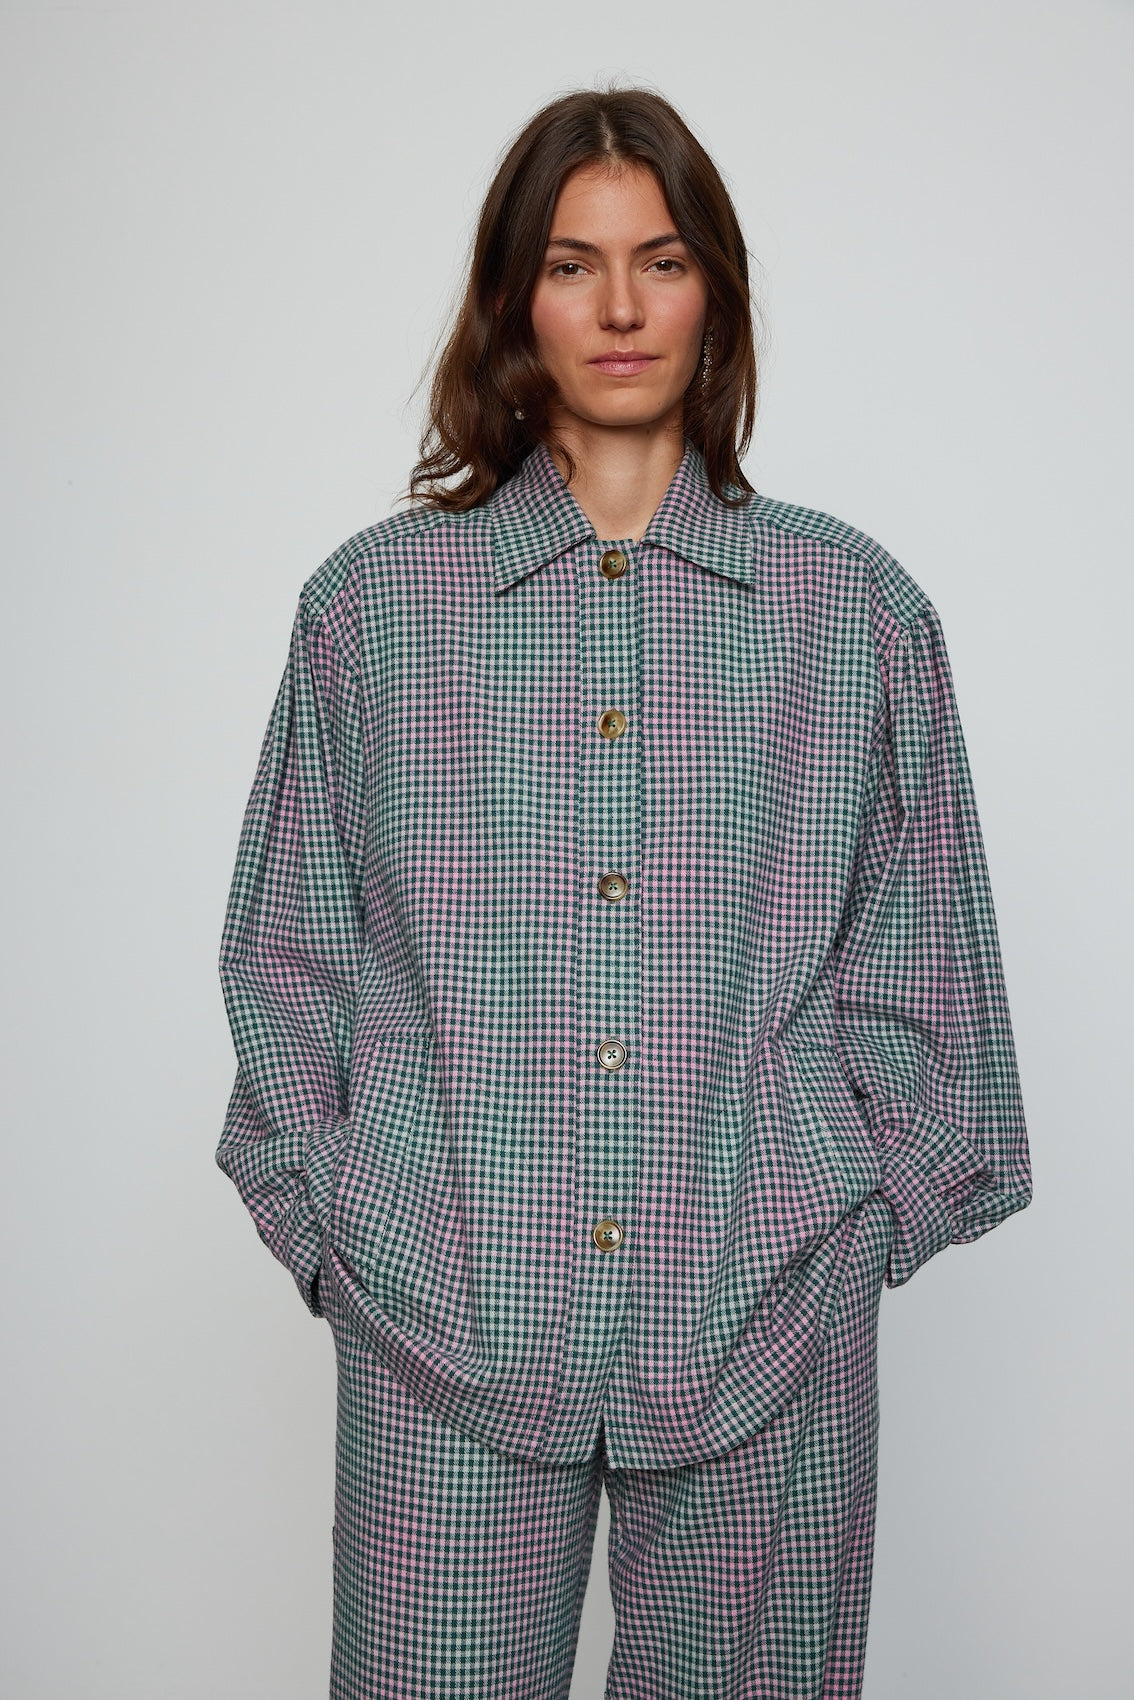 Caro Editions Hannah shirt in soft cotton flannel. The shirt features an oversized fit, big sleeves, and buttons at the front.  Style it with matching Hannah pants or jeans, or wear it open over a t-shirt or tank top.